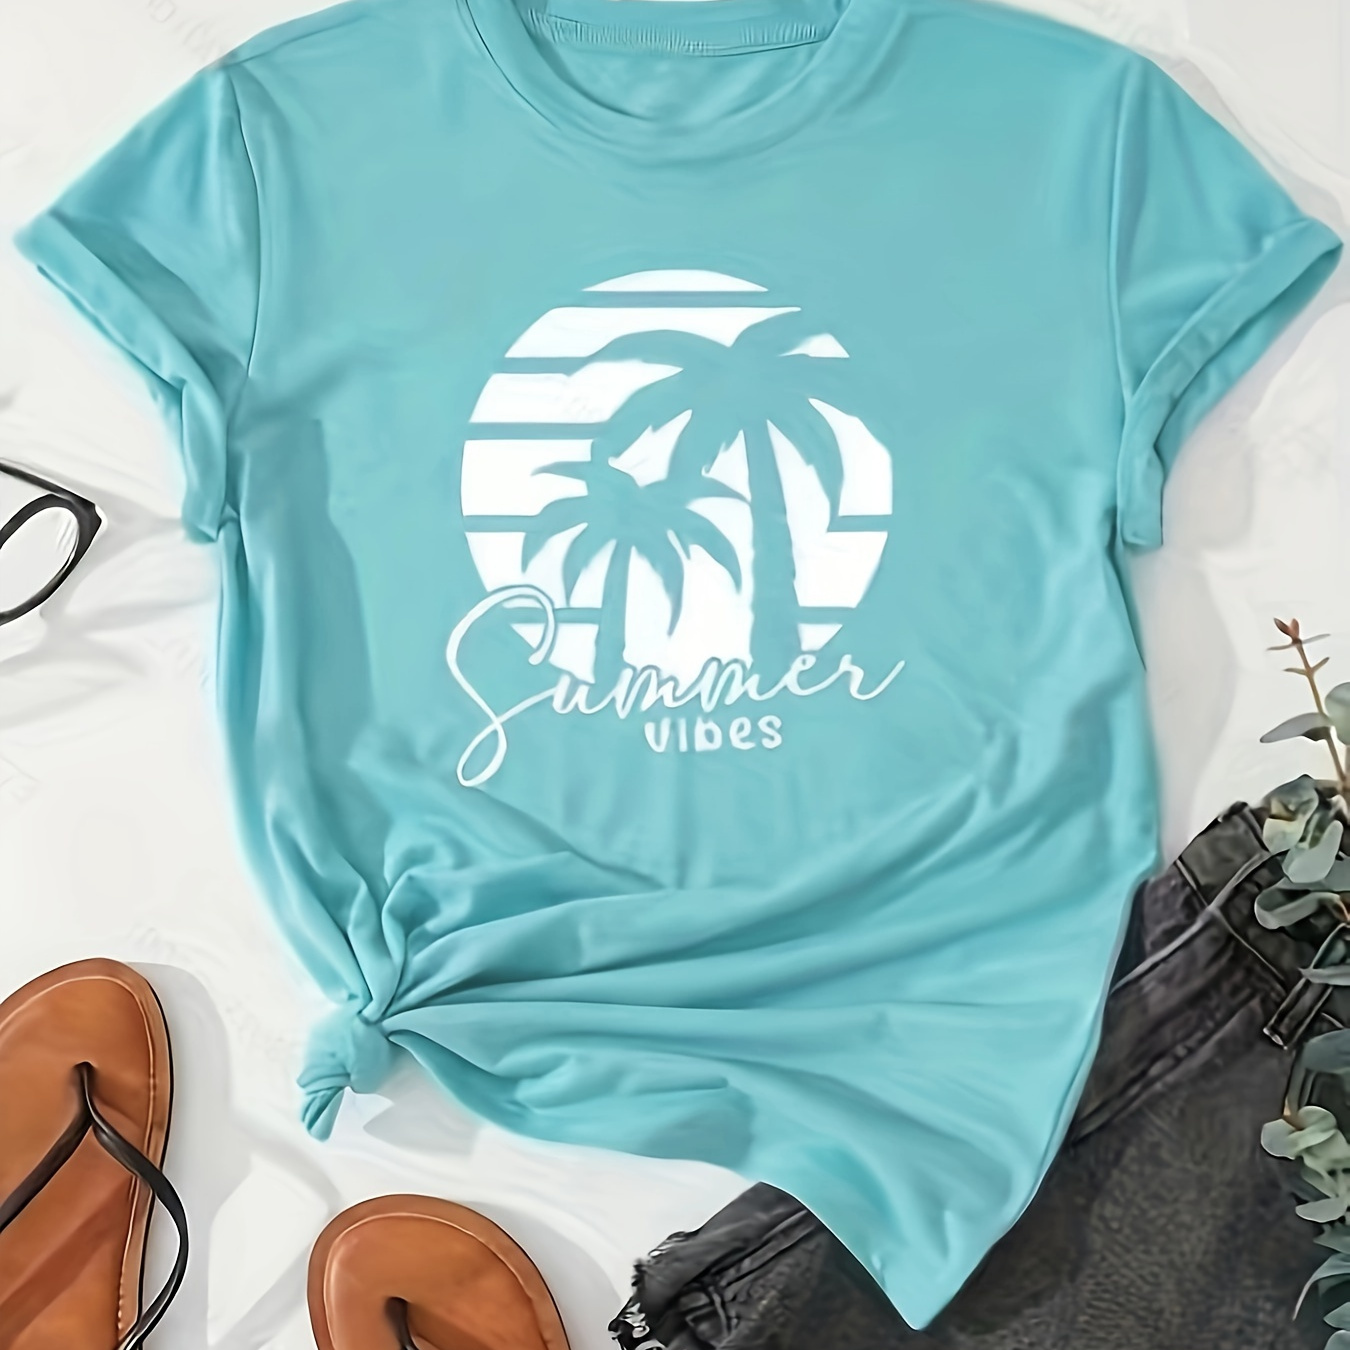 

Coconut Tree Print Crew Neck T-shirt, Casual Short Sleeve Top For Spring & Summer, Women's Clothing